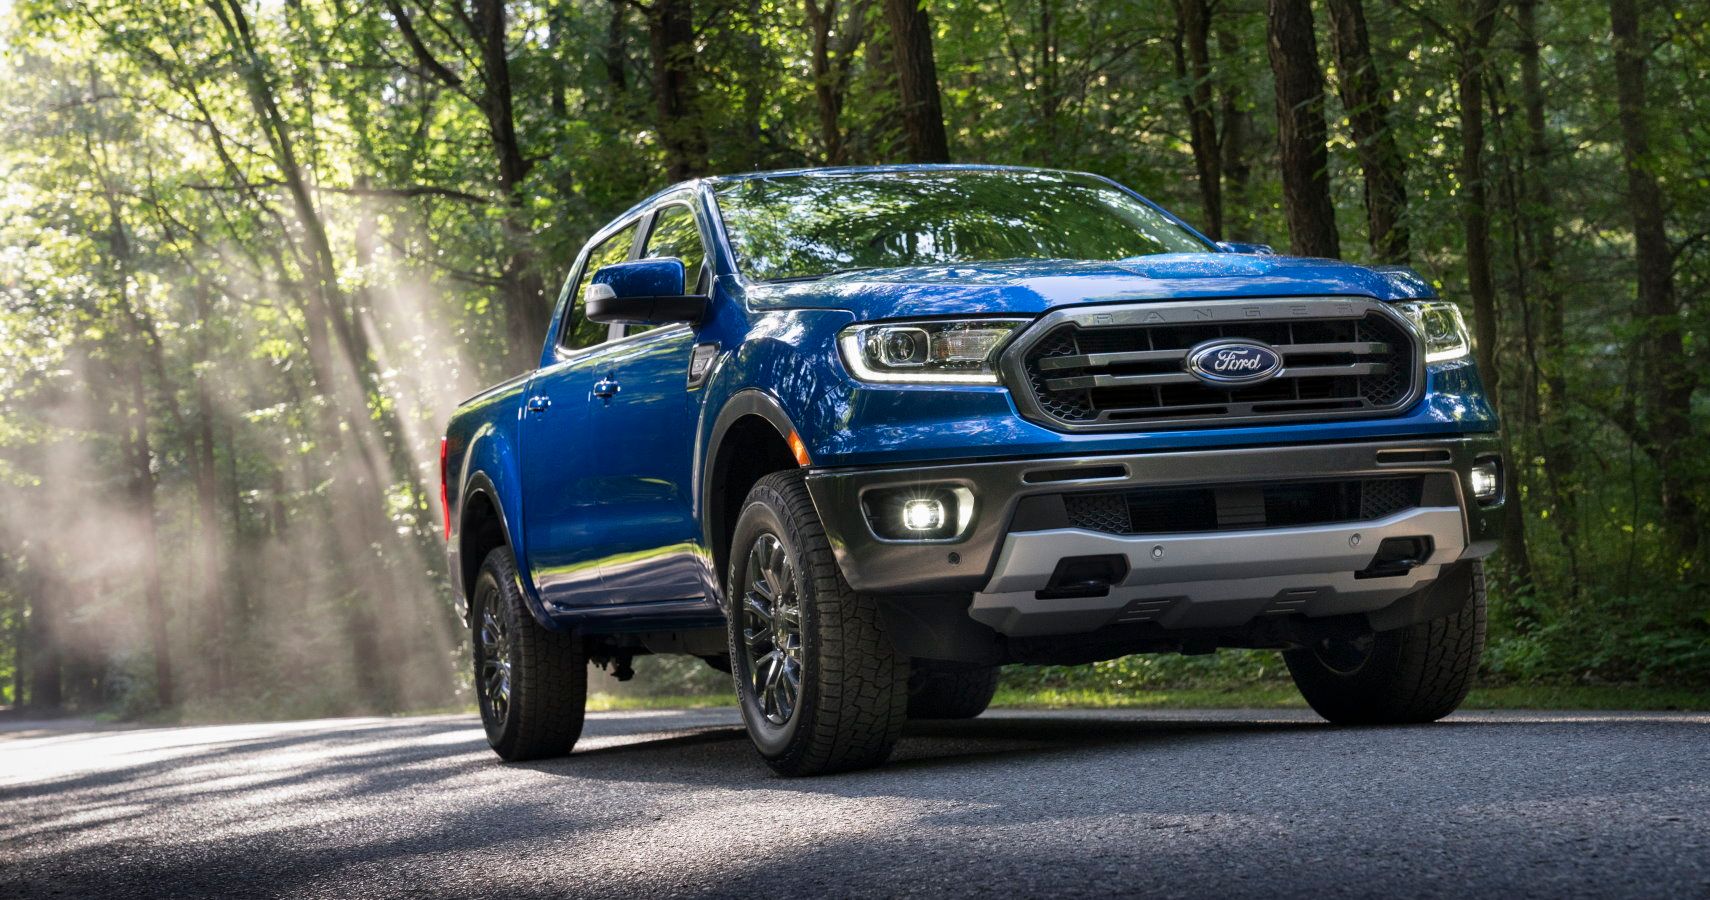 Ranger FX2 Package sports tough styling and capability upgrades with an electronic-locking rear differential, off-road tires, off-road-tuned suspension, front underbody guard and Ford???s off-road cluster screen